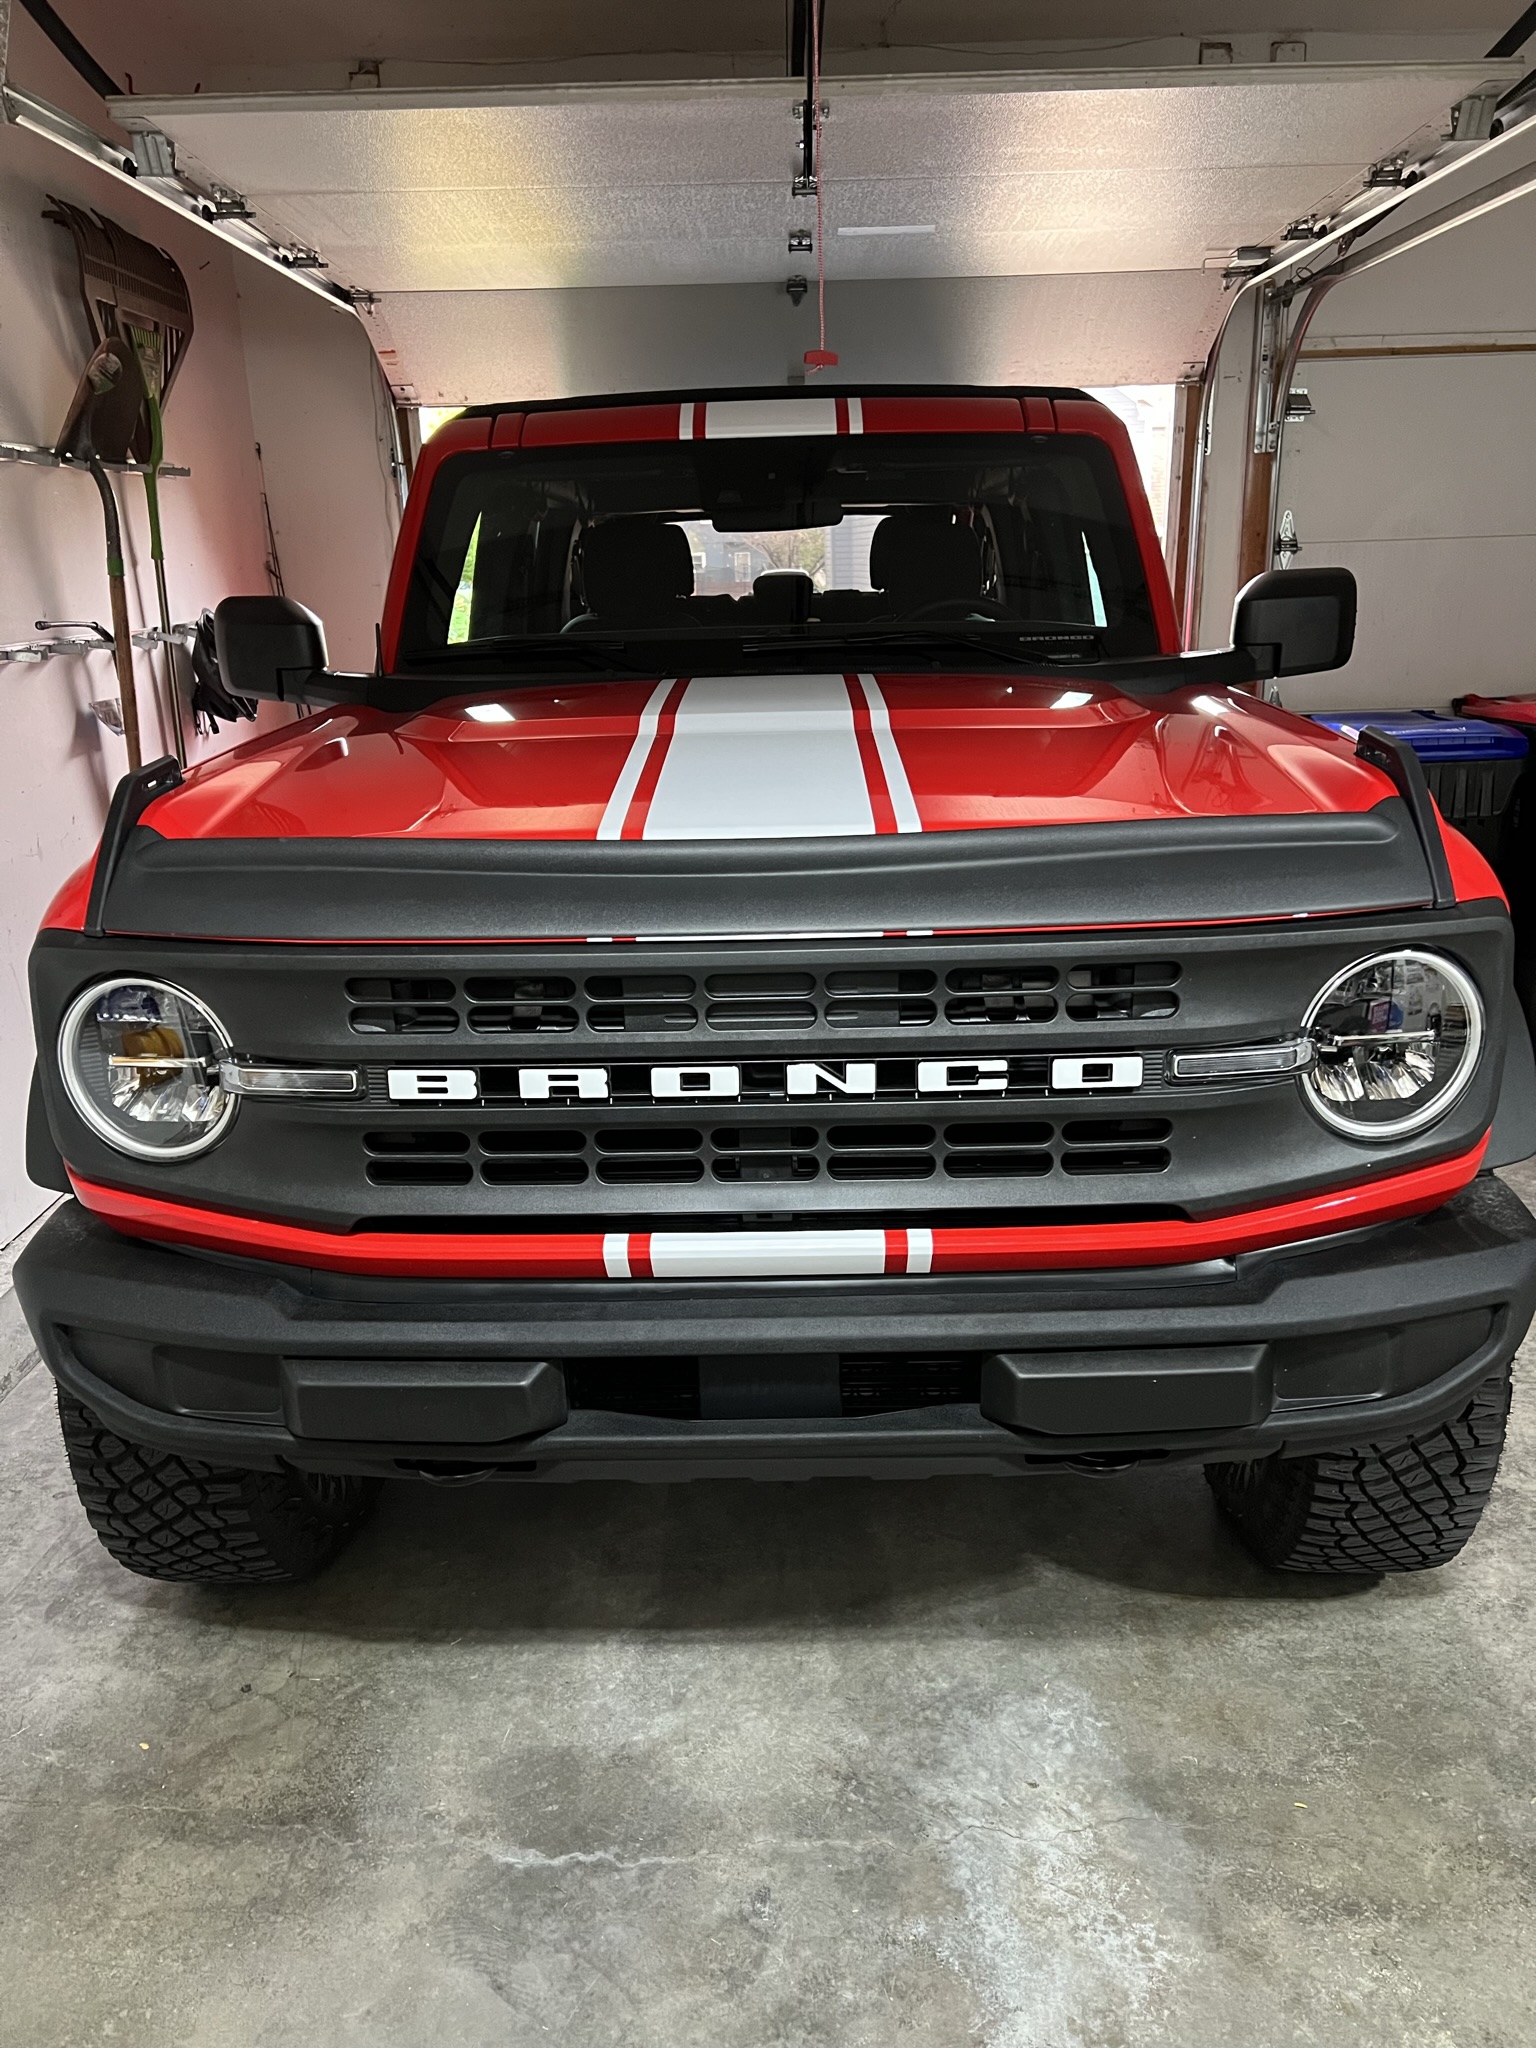 Ford Bronco InTheShift’s Base Sasquatch Race Red Build w/ Racing Stripes Bronco Charlevoix